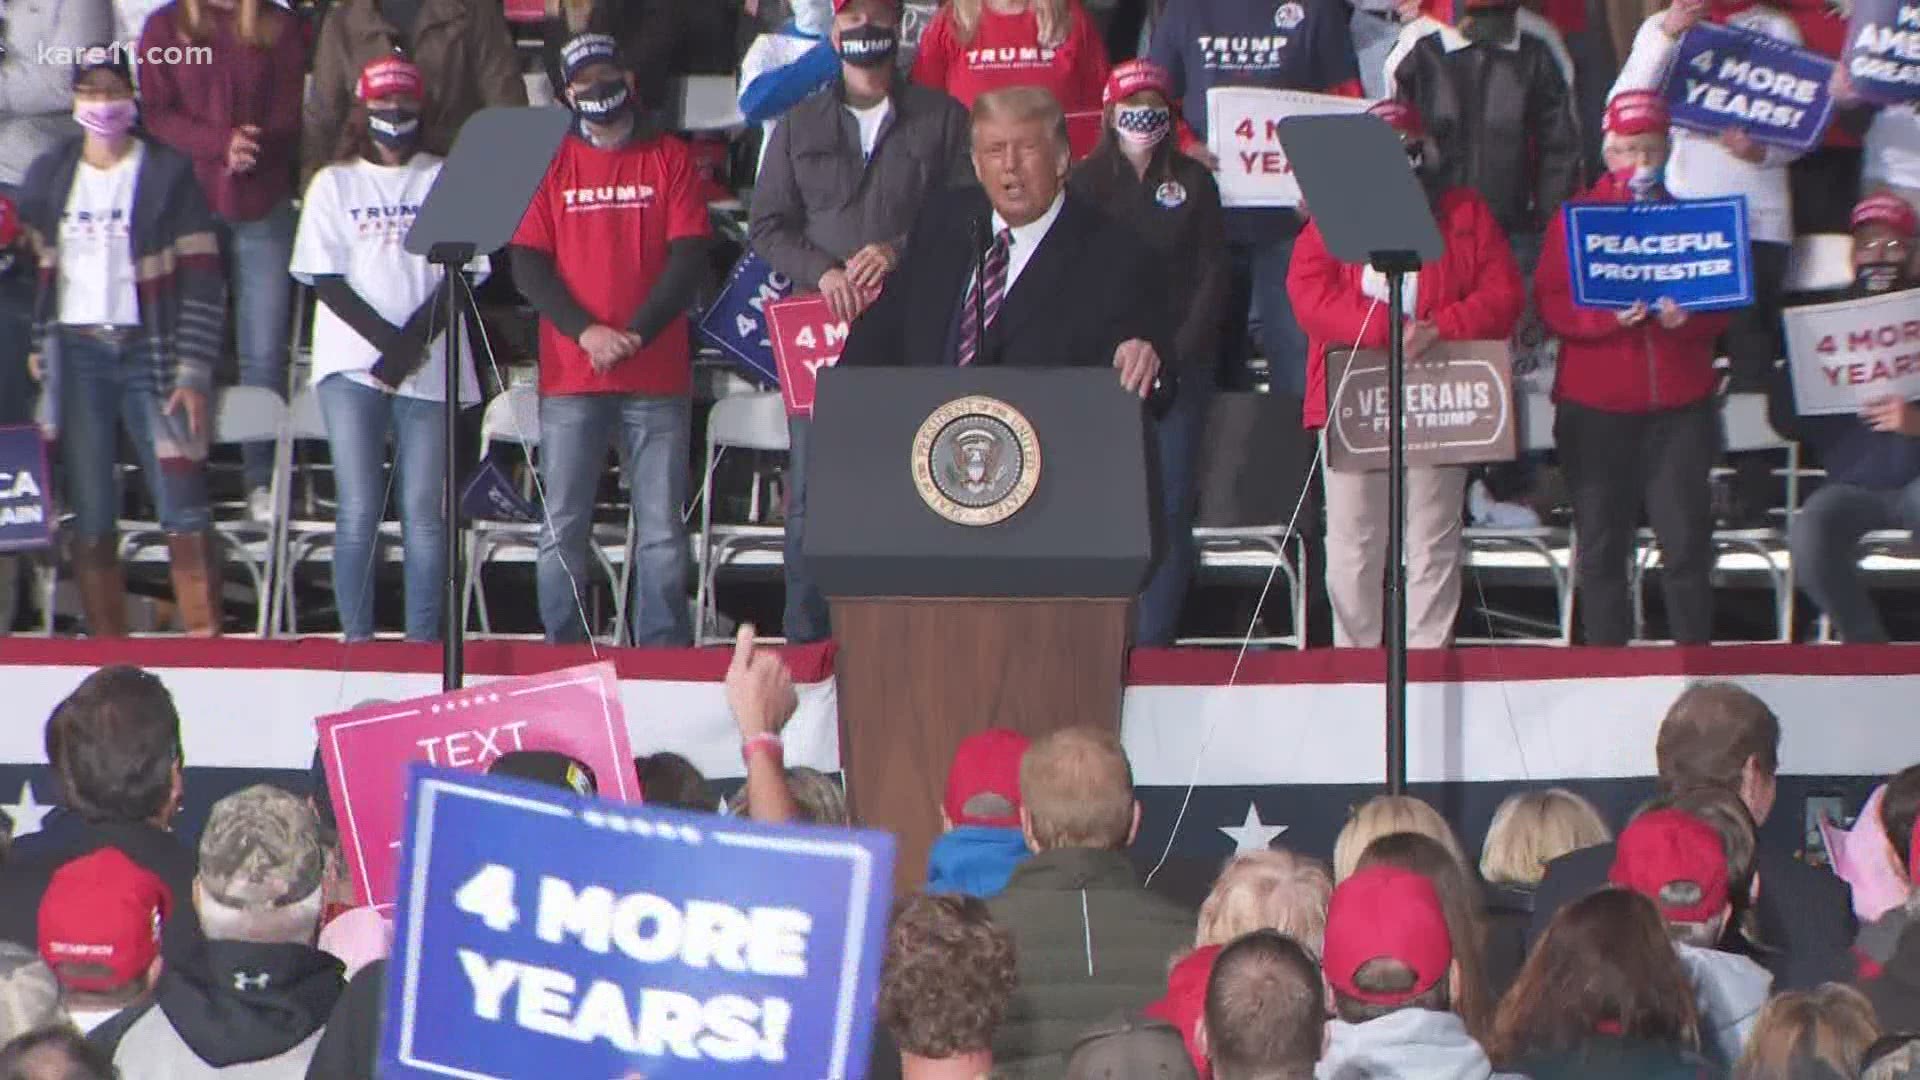 President Trump delivered remarks at a 'Great American Comeback' rally in Bemidji, held in support of his campaign for reelection